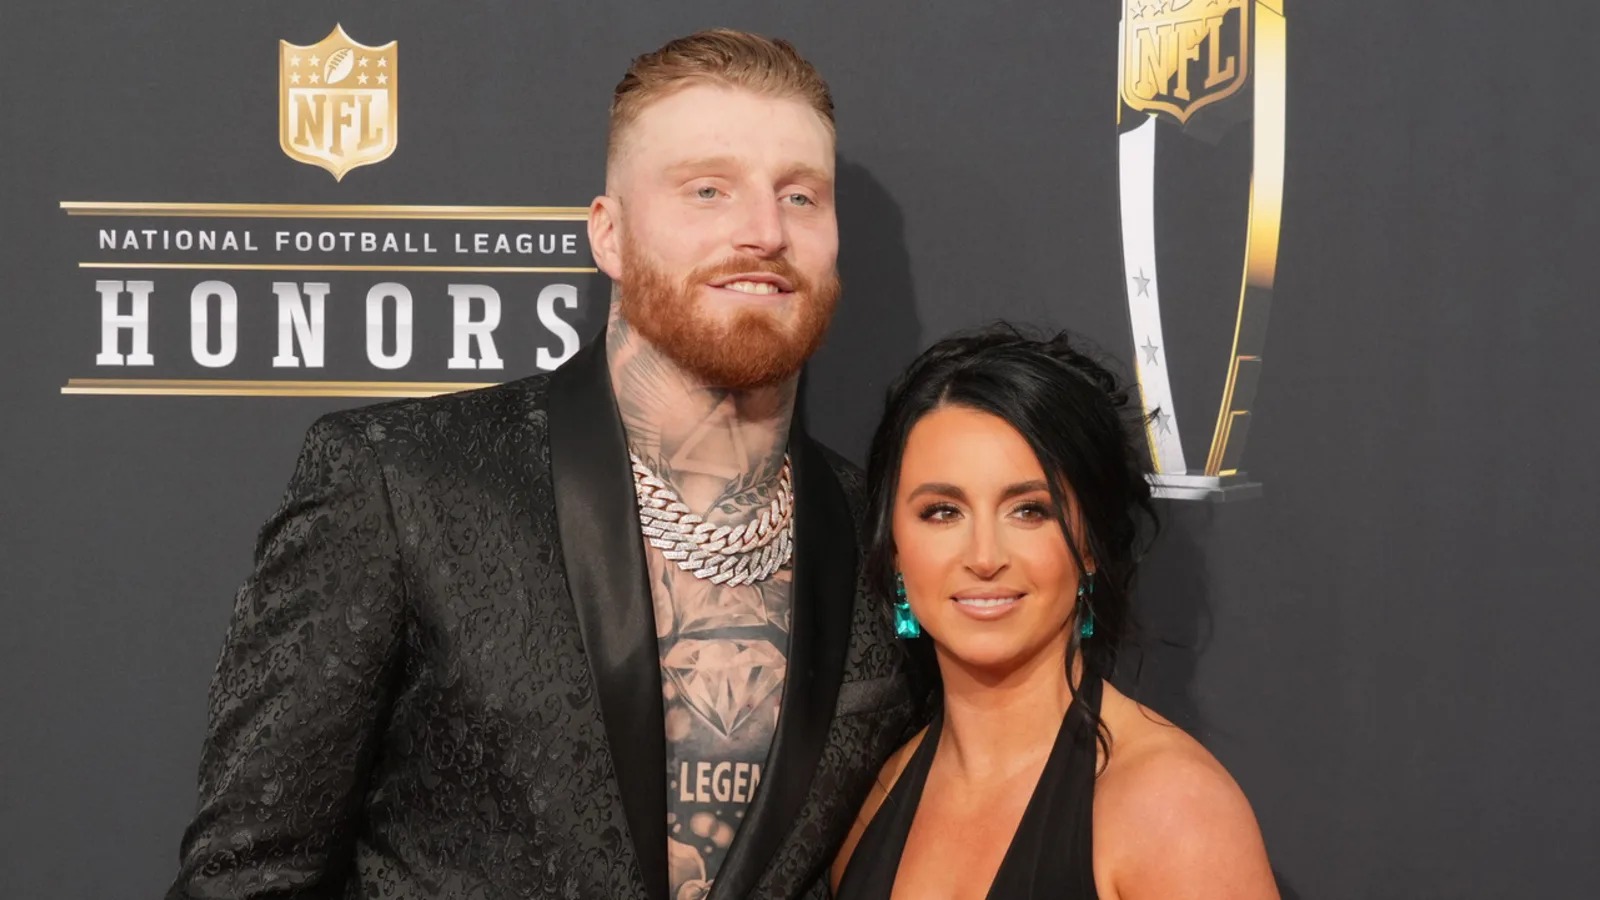 Congratulations: Raiders Star Maxx Crosby and His Beautiful Wife Announce Their Four-Month Pregnancy of second child – and Guess What Happened?